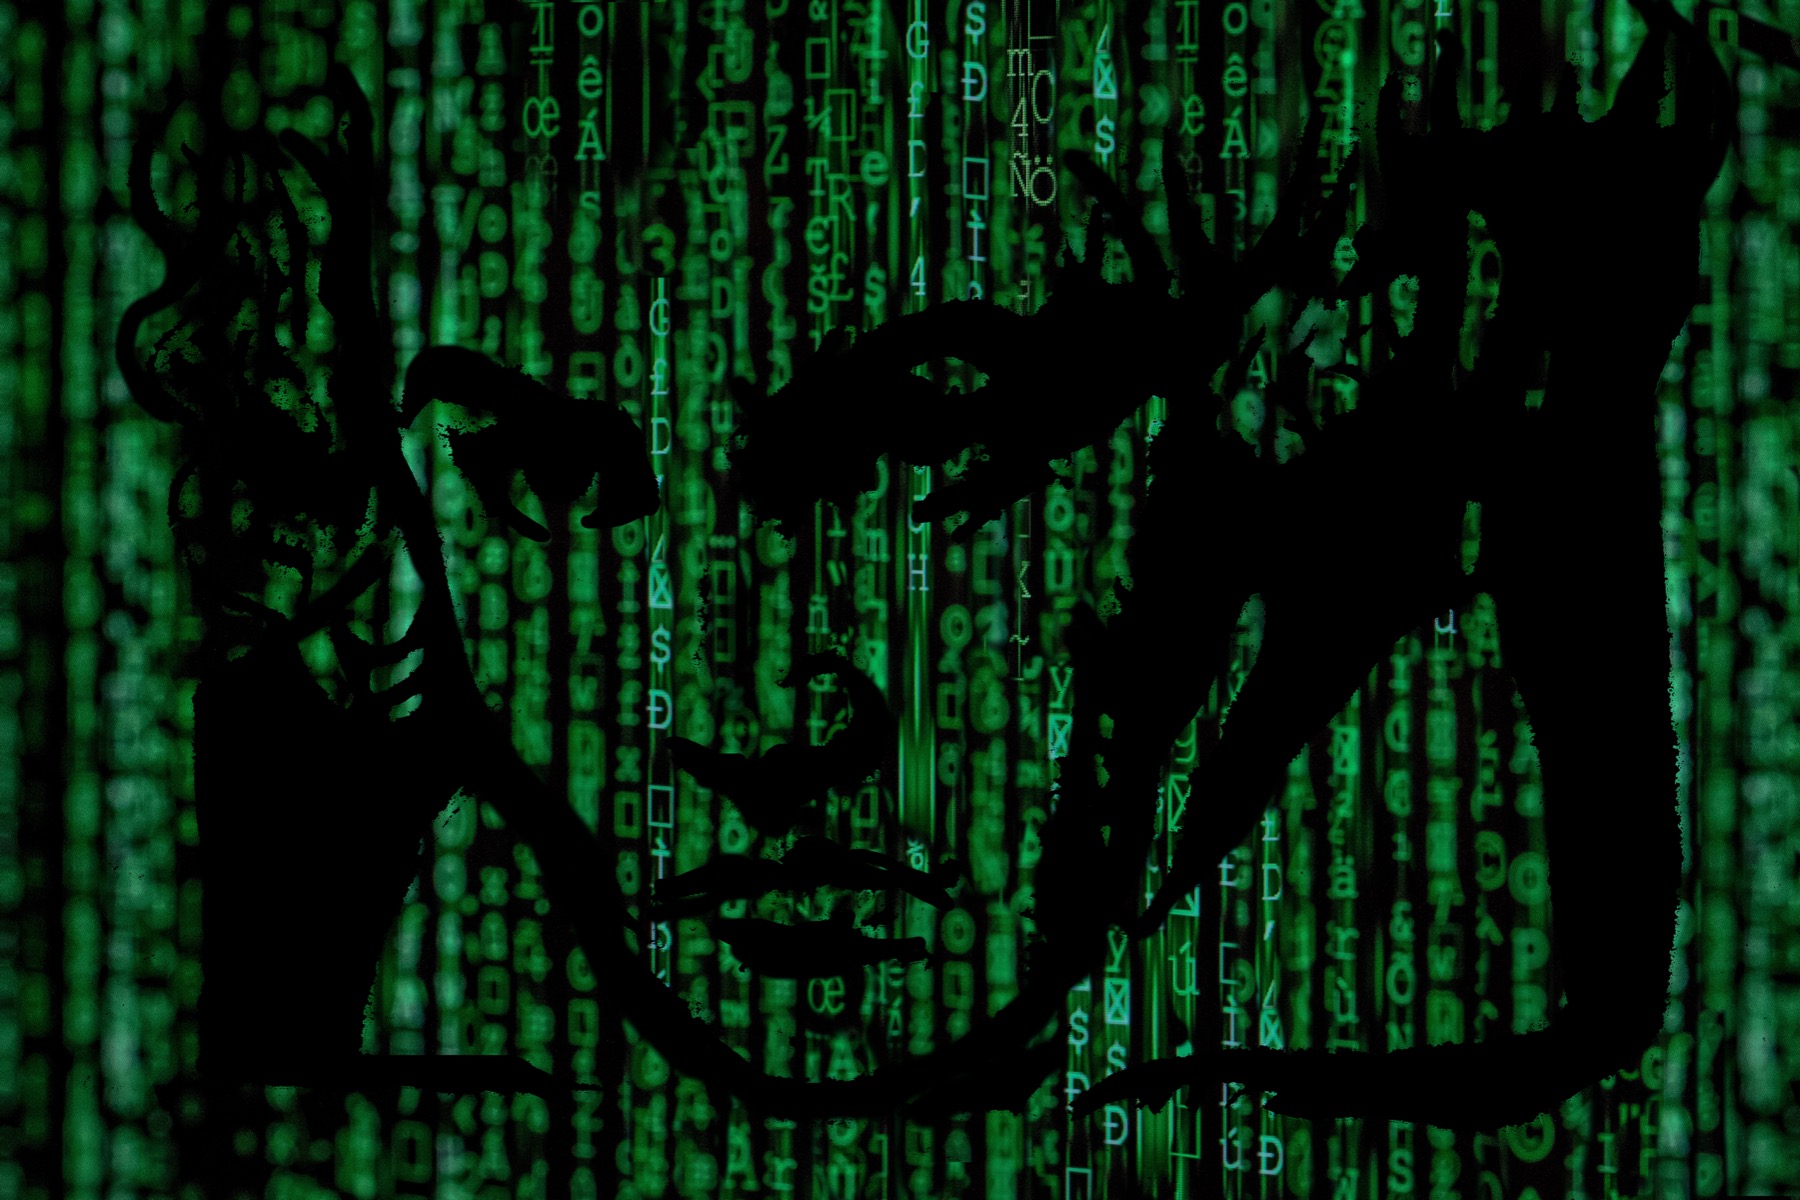 Beethoven's face shows up in computer code similar to the Matrix